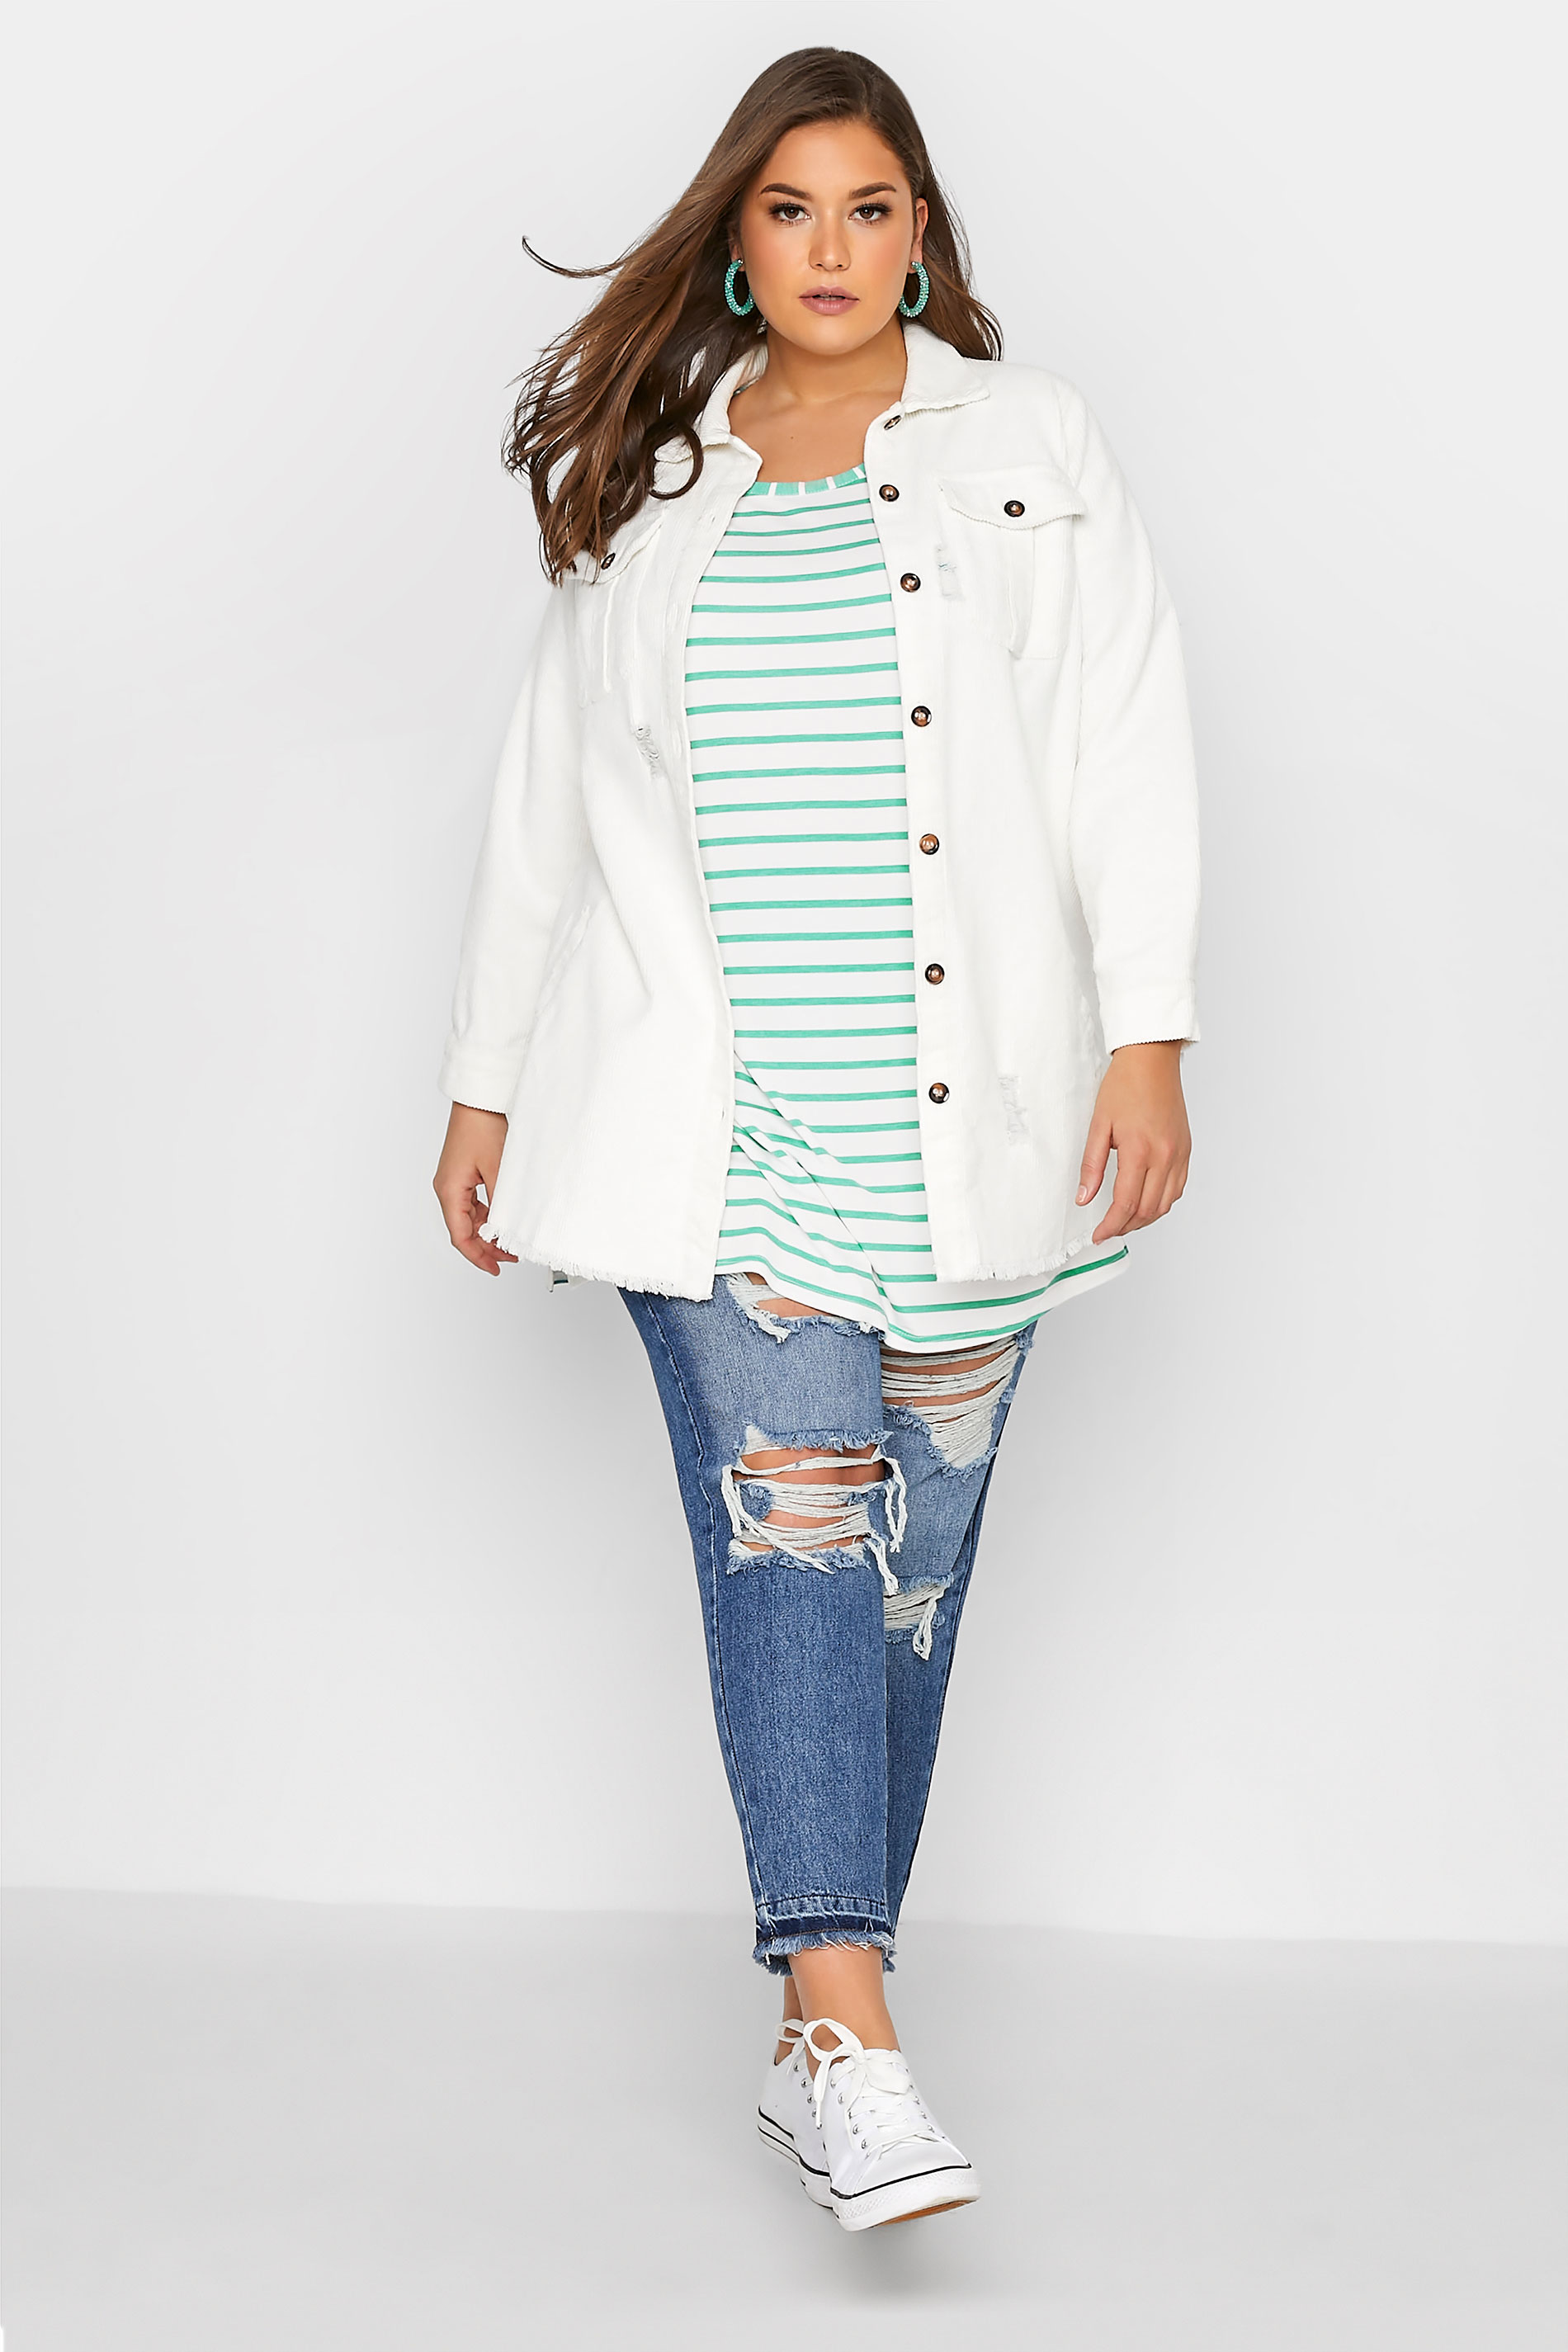 Grande taille  Tops Grande taille  Tops Casual | LIMITED COLLECTION - T-Shirt Oversize Vert & Blanc à Rayures - EG41680